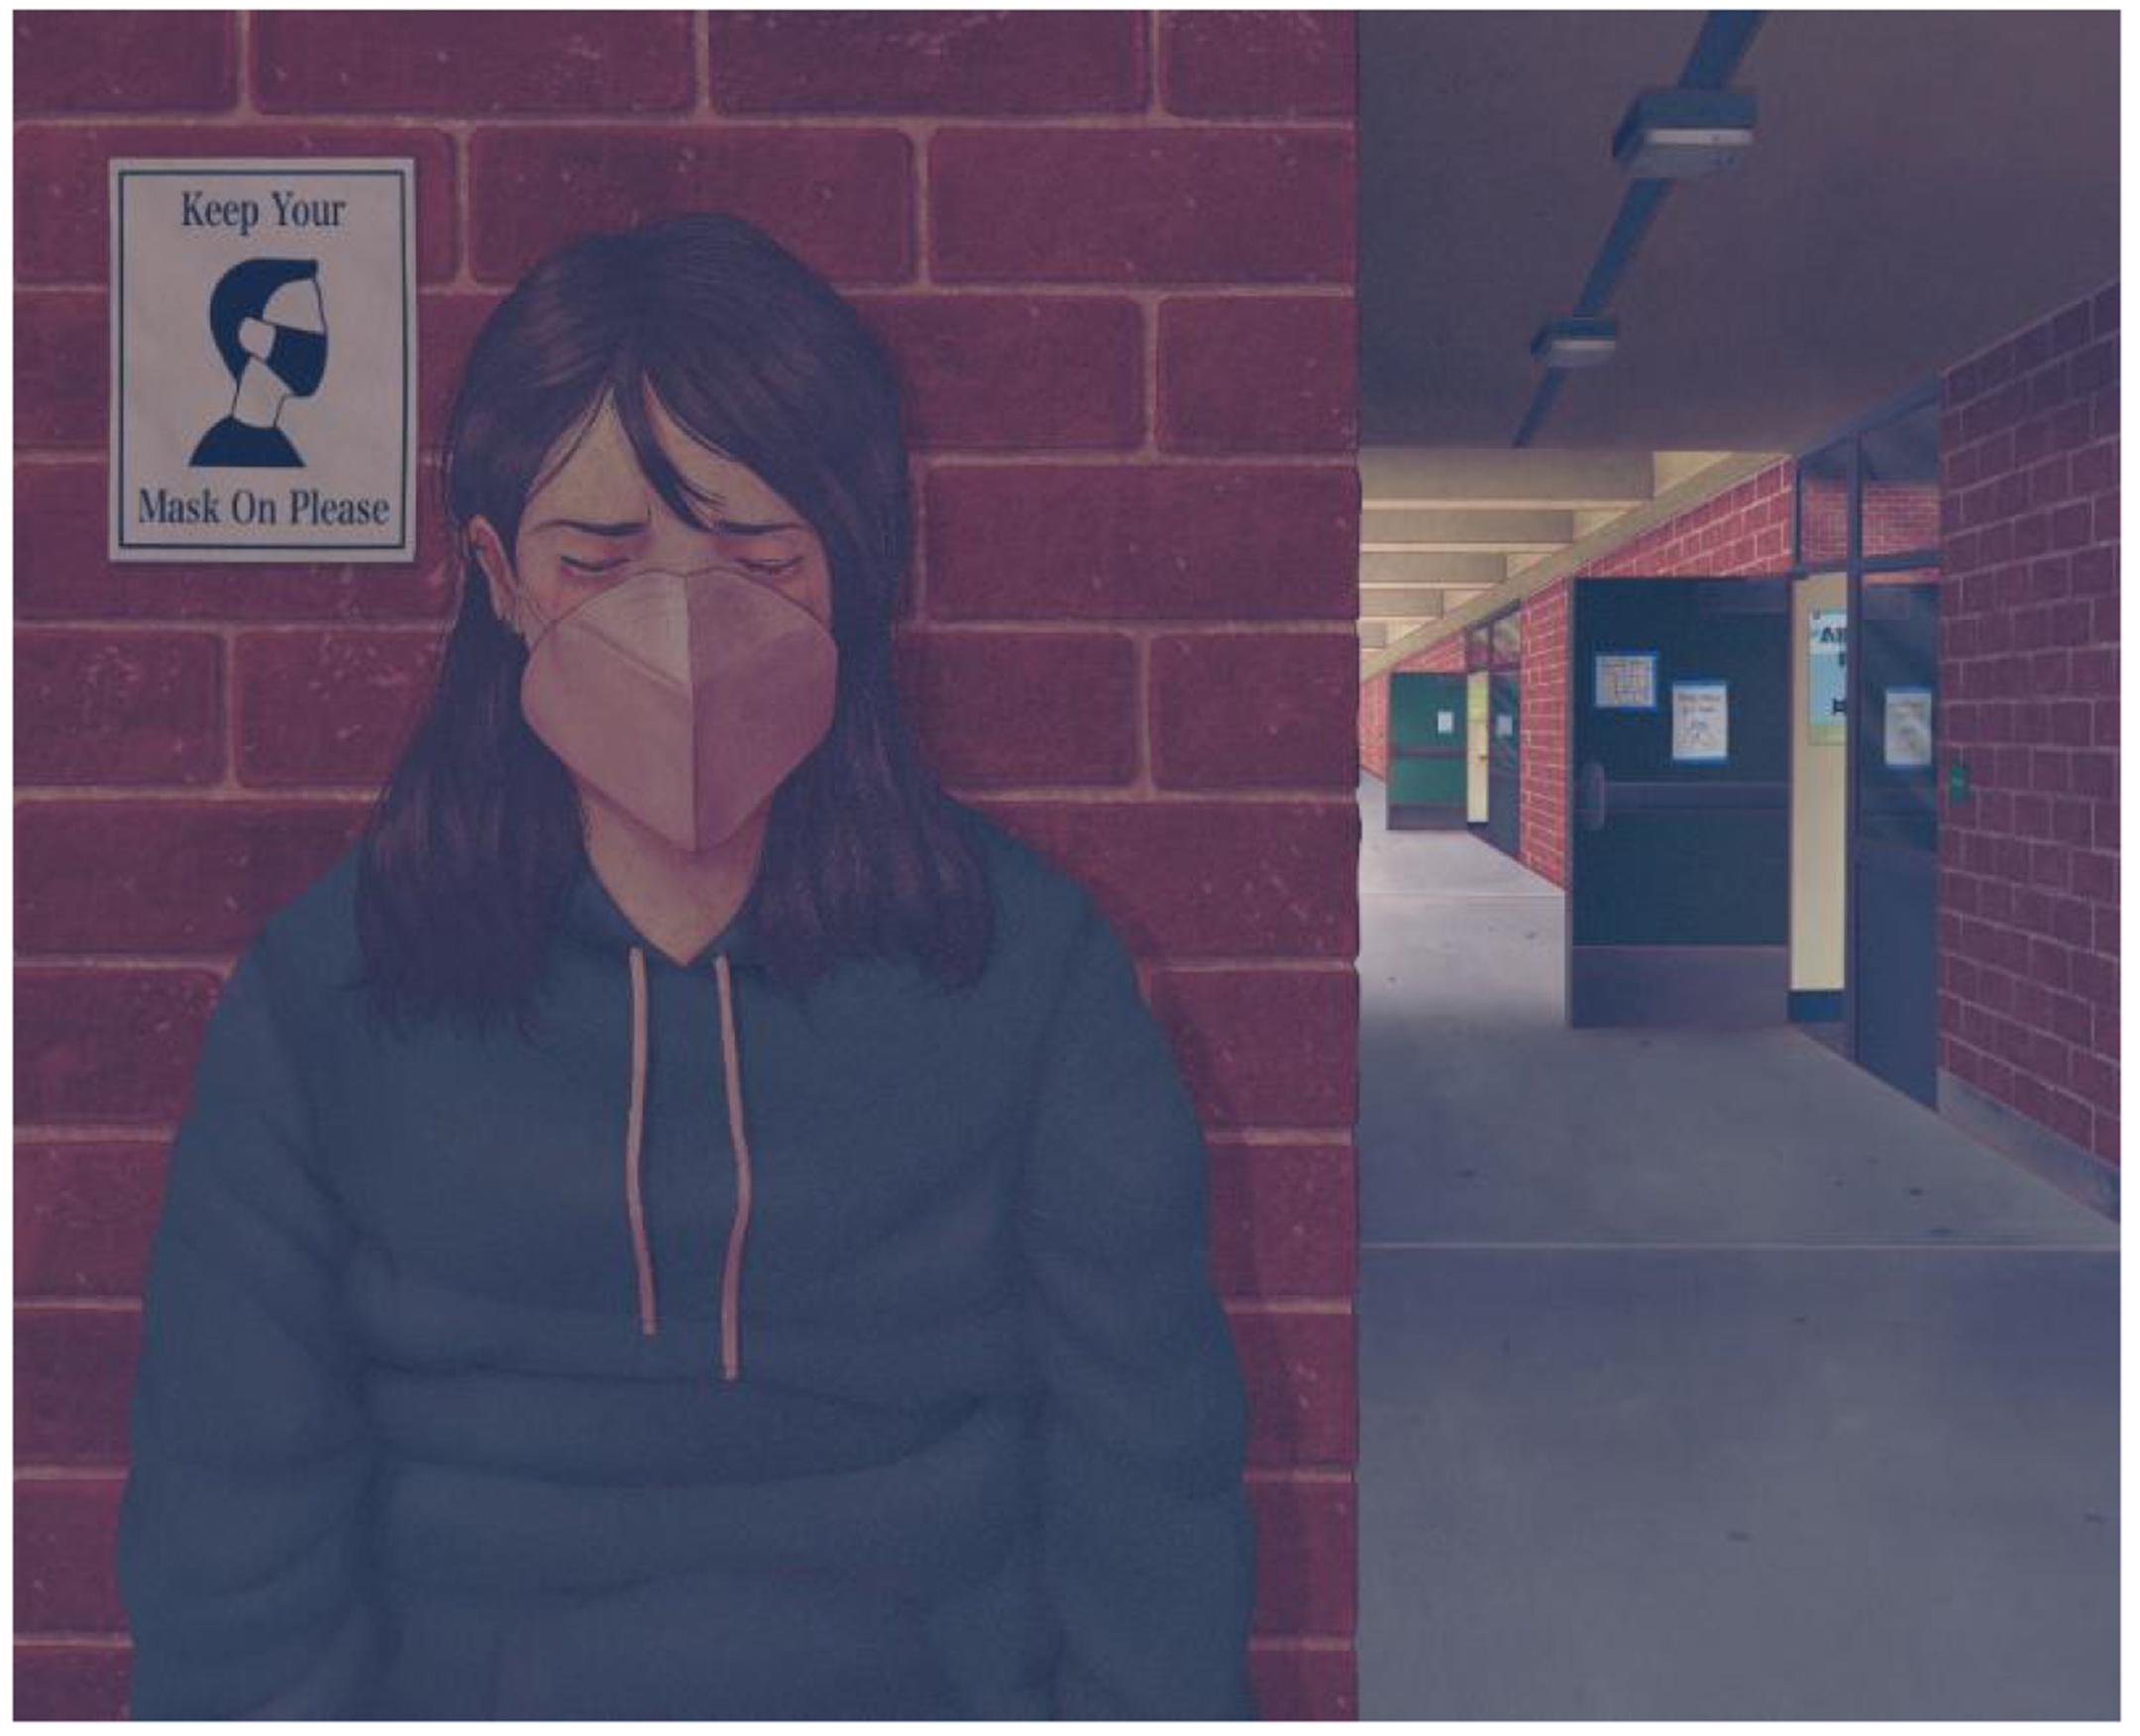 Illustration of a young woman wearing a face mask with her back against a school wall, off the hallway, where she closes her eyes in exhaustion and anxiety